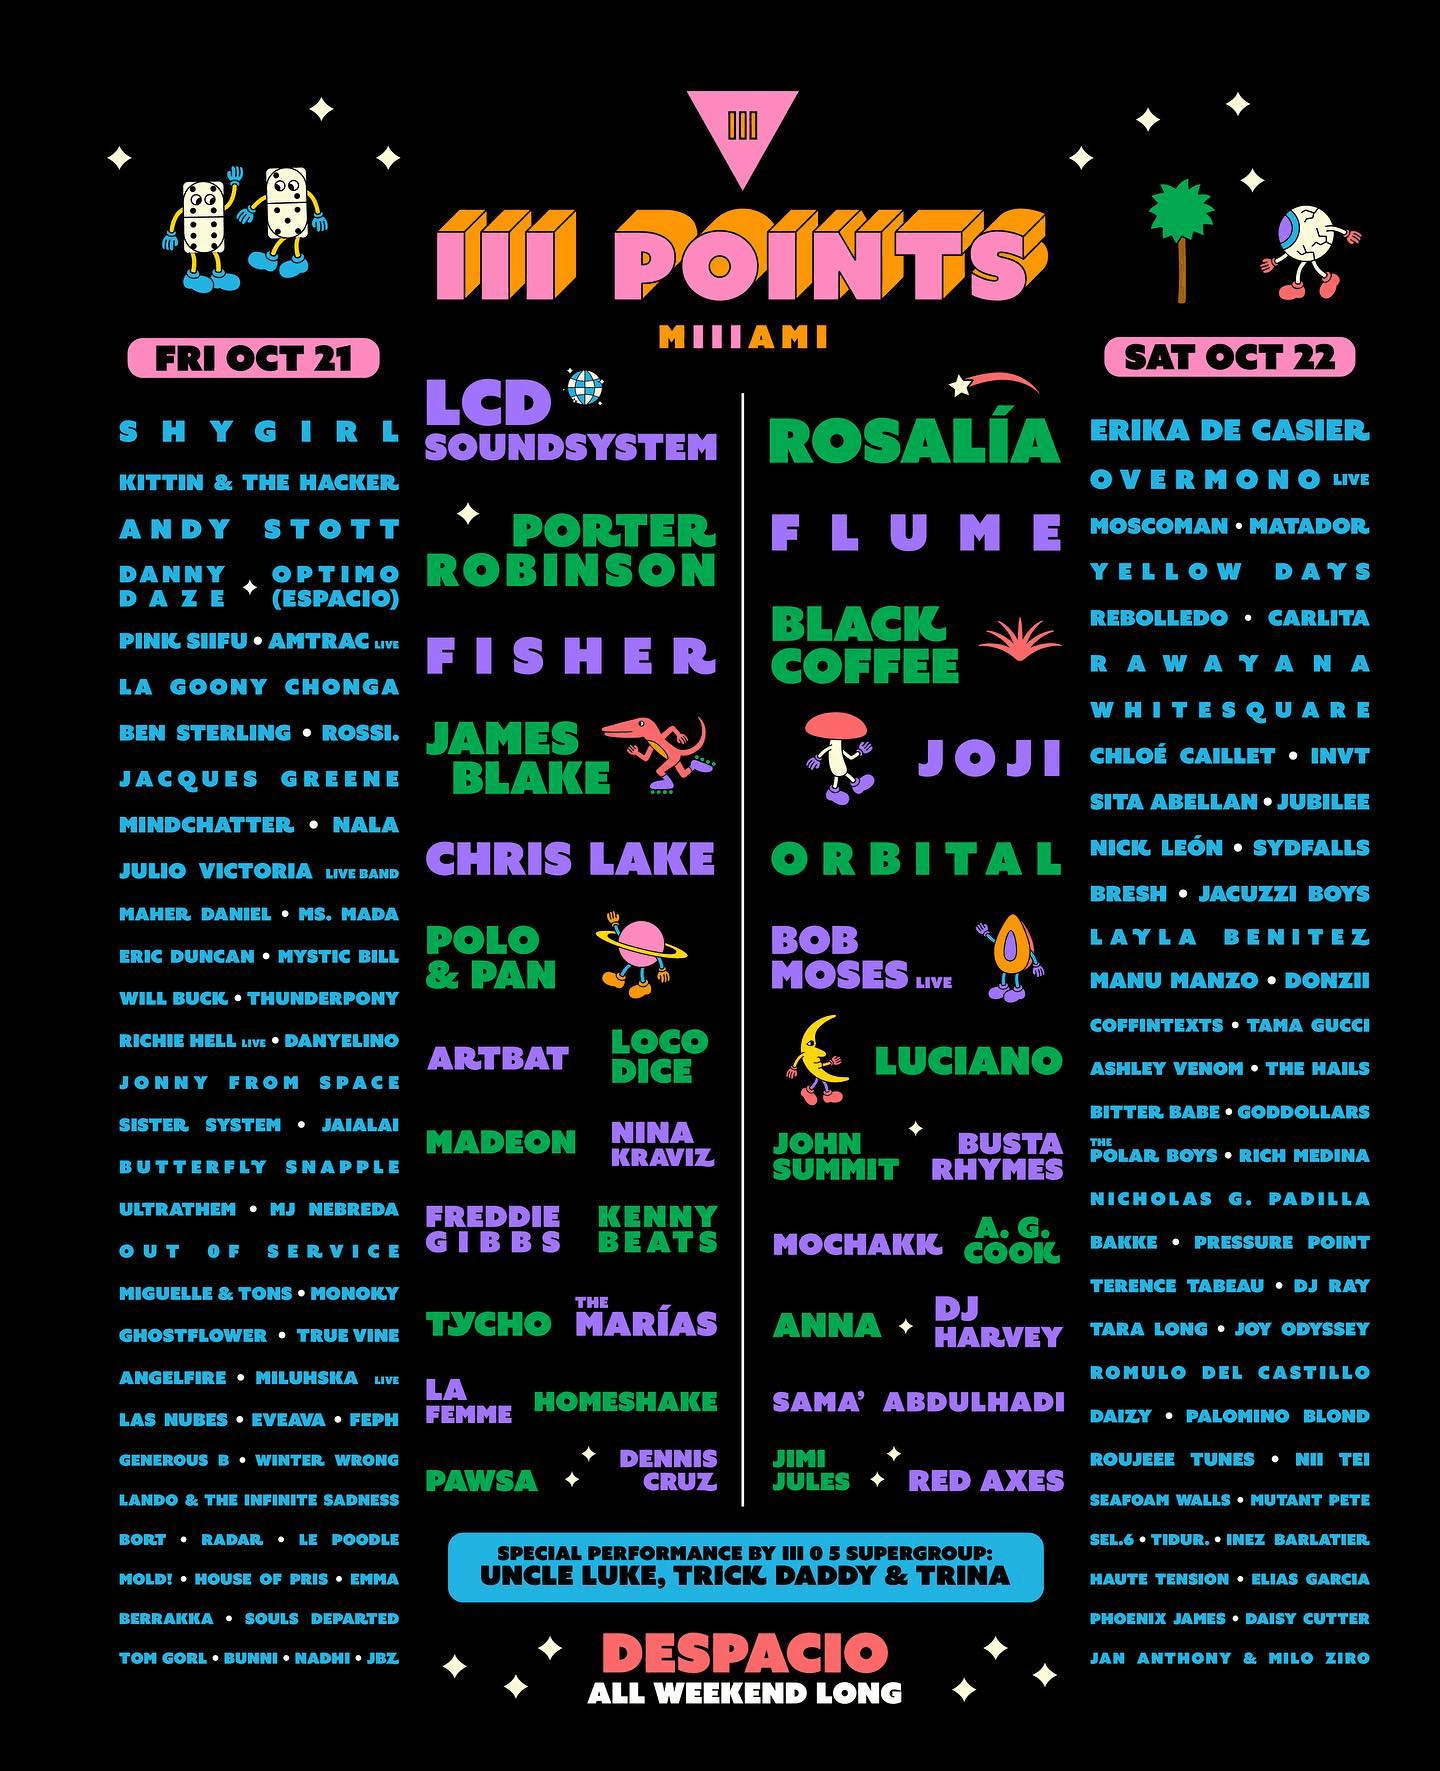 Lineup Poster III Points 2022